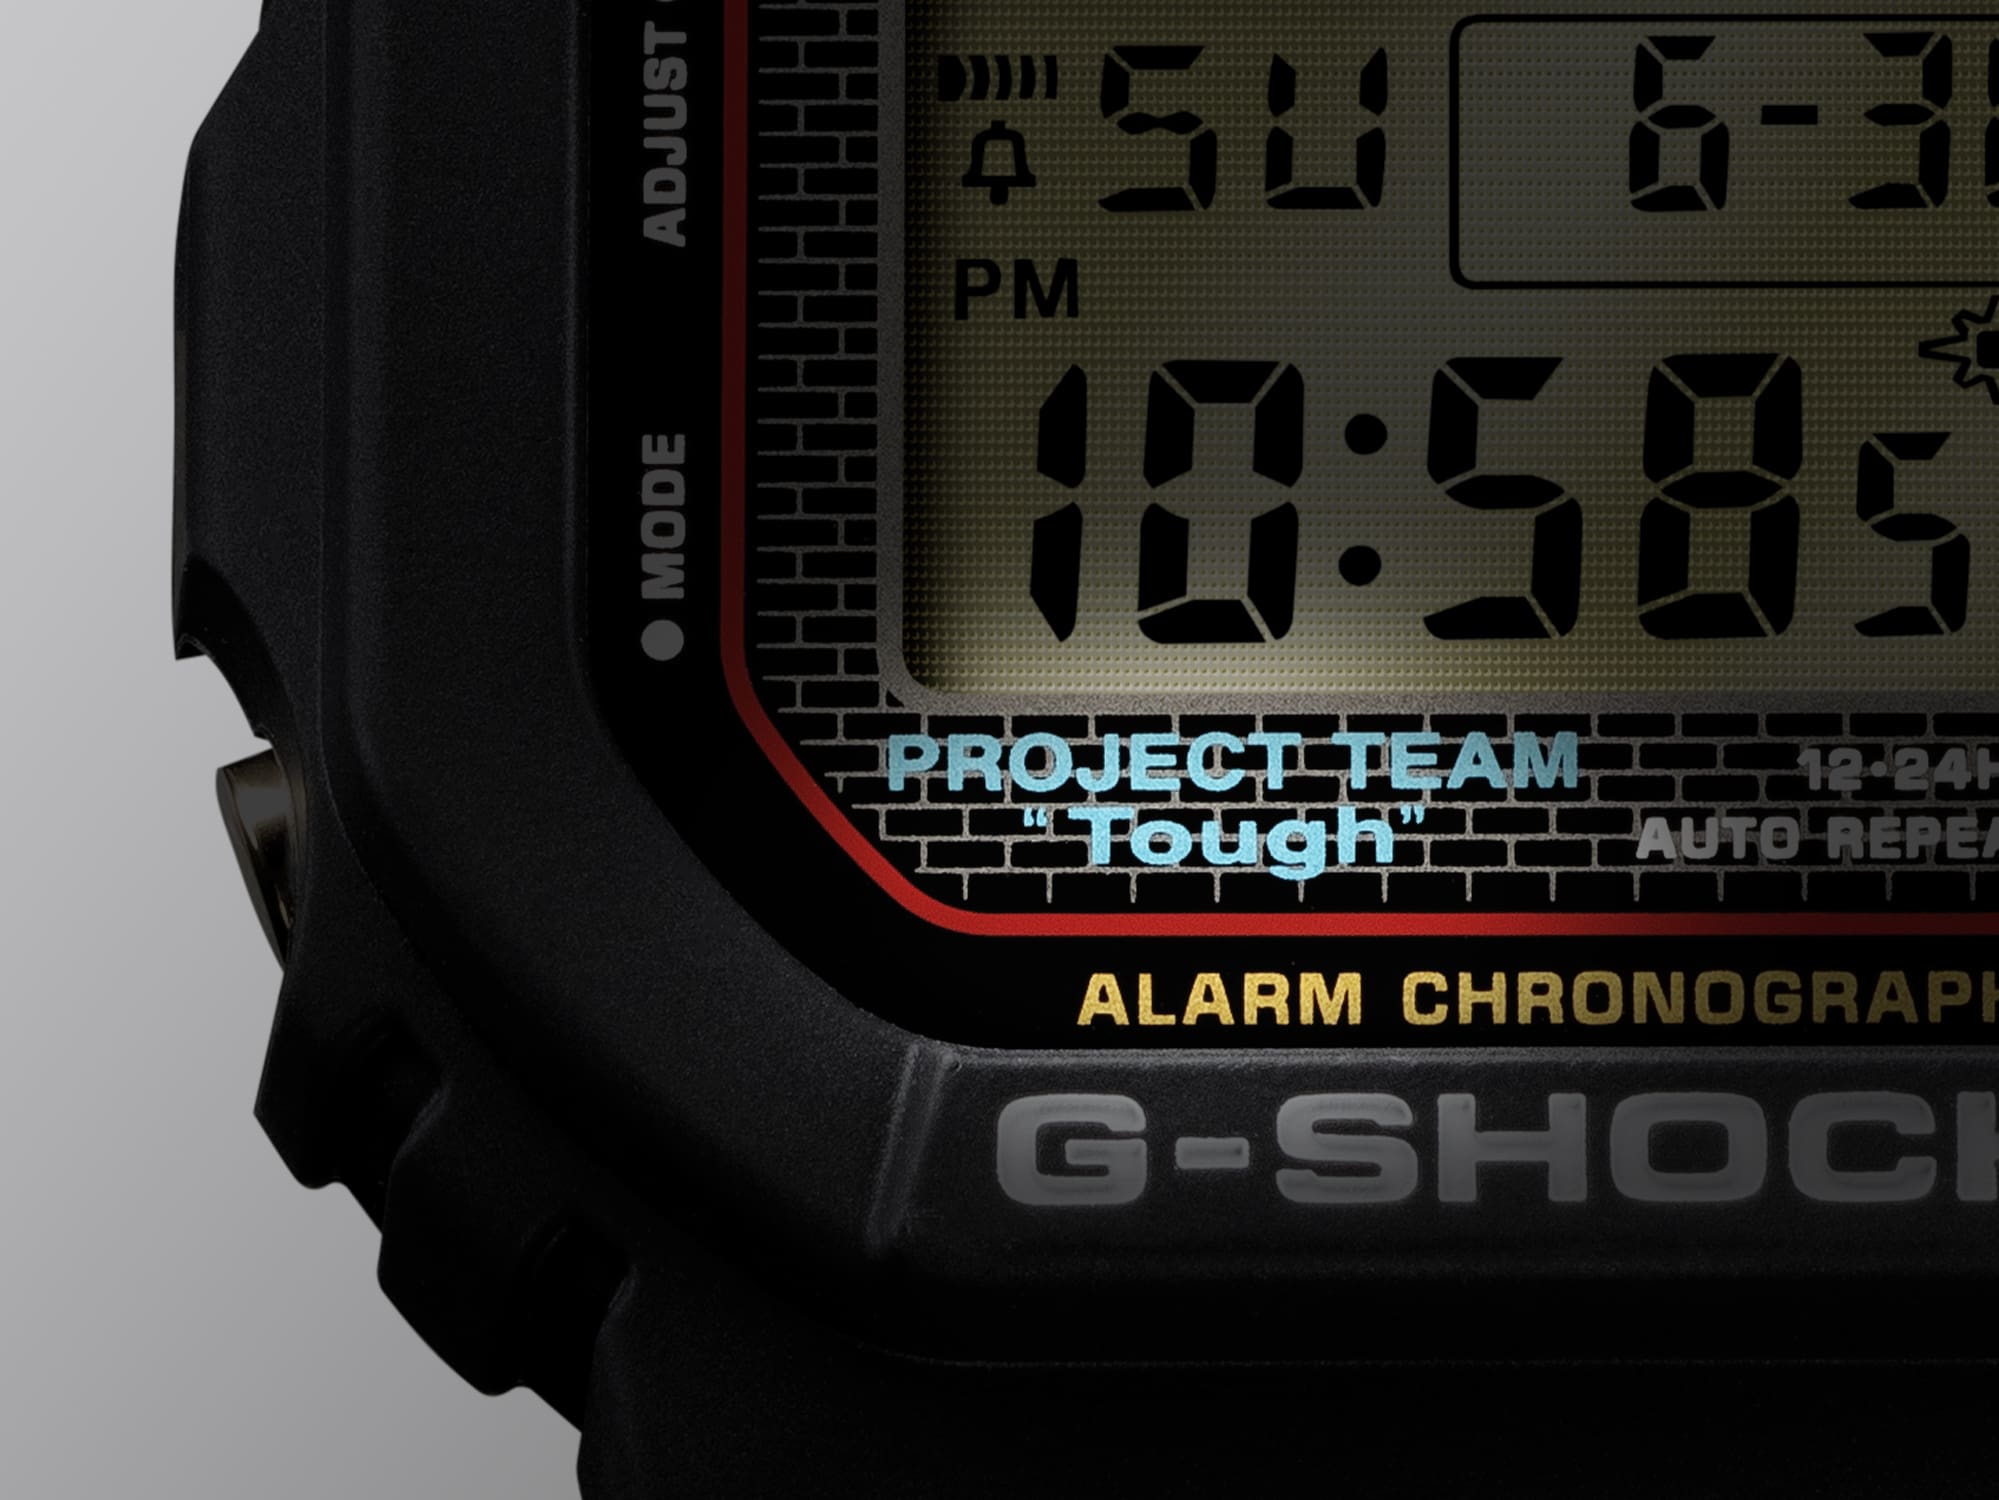 Project team "tough" badge on the face of a G-SHOCK watch